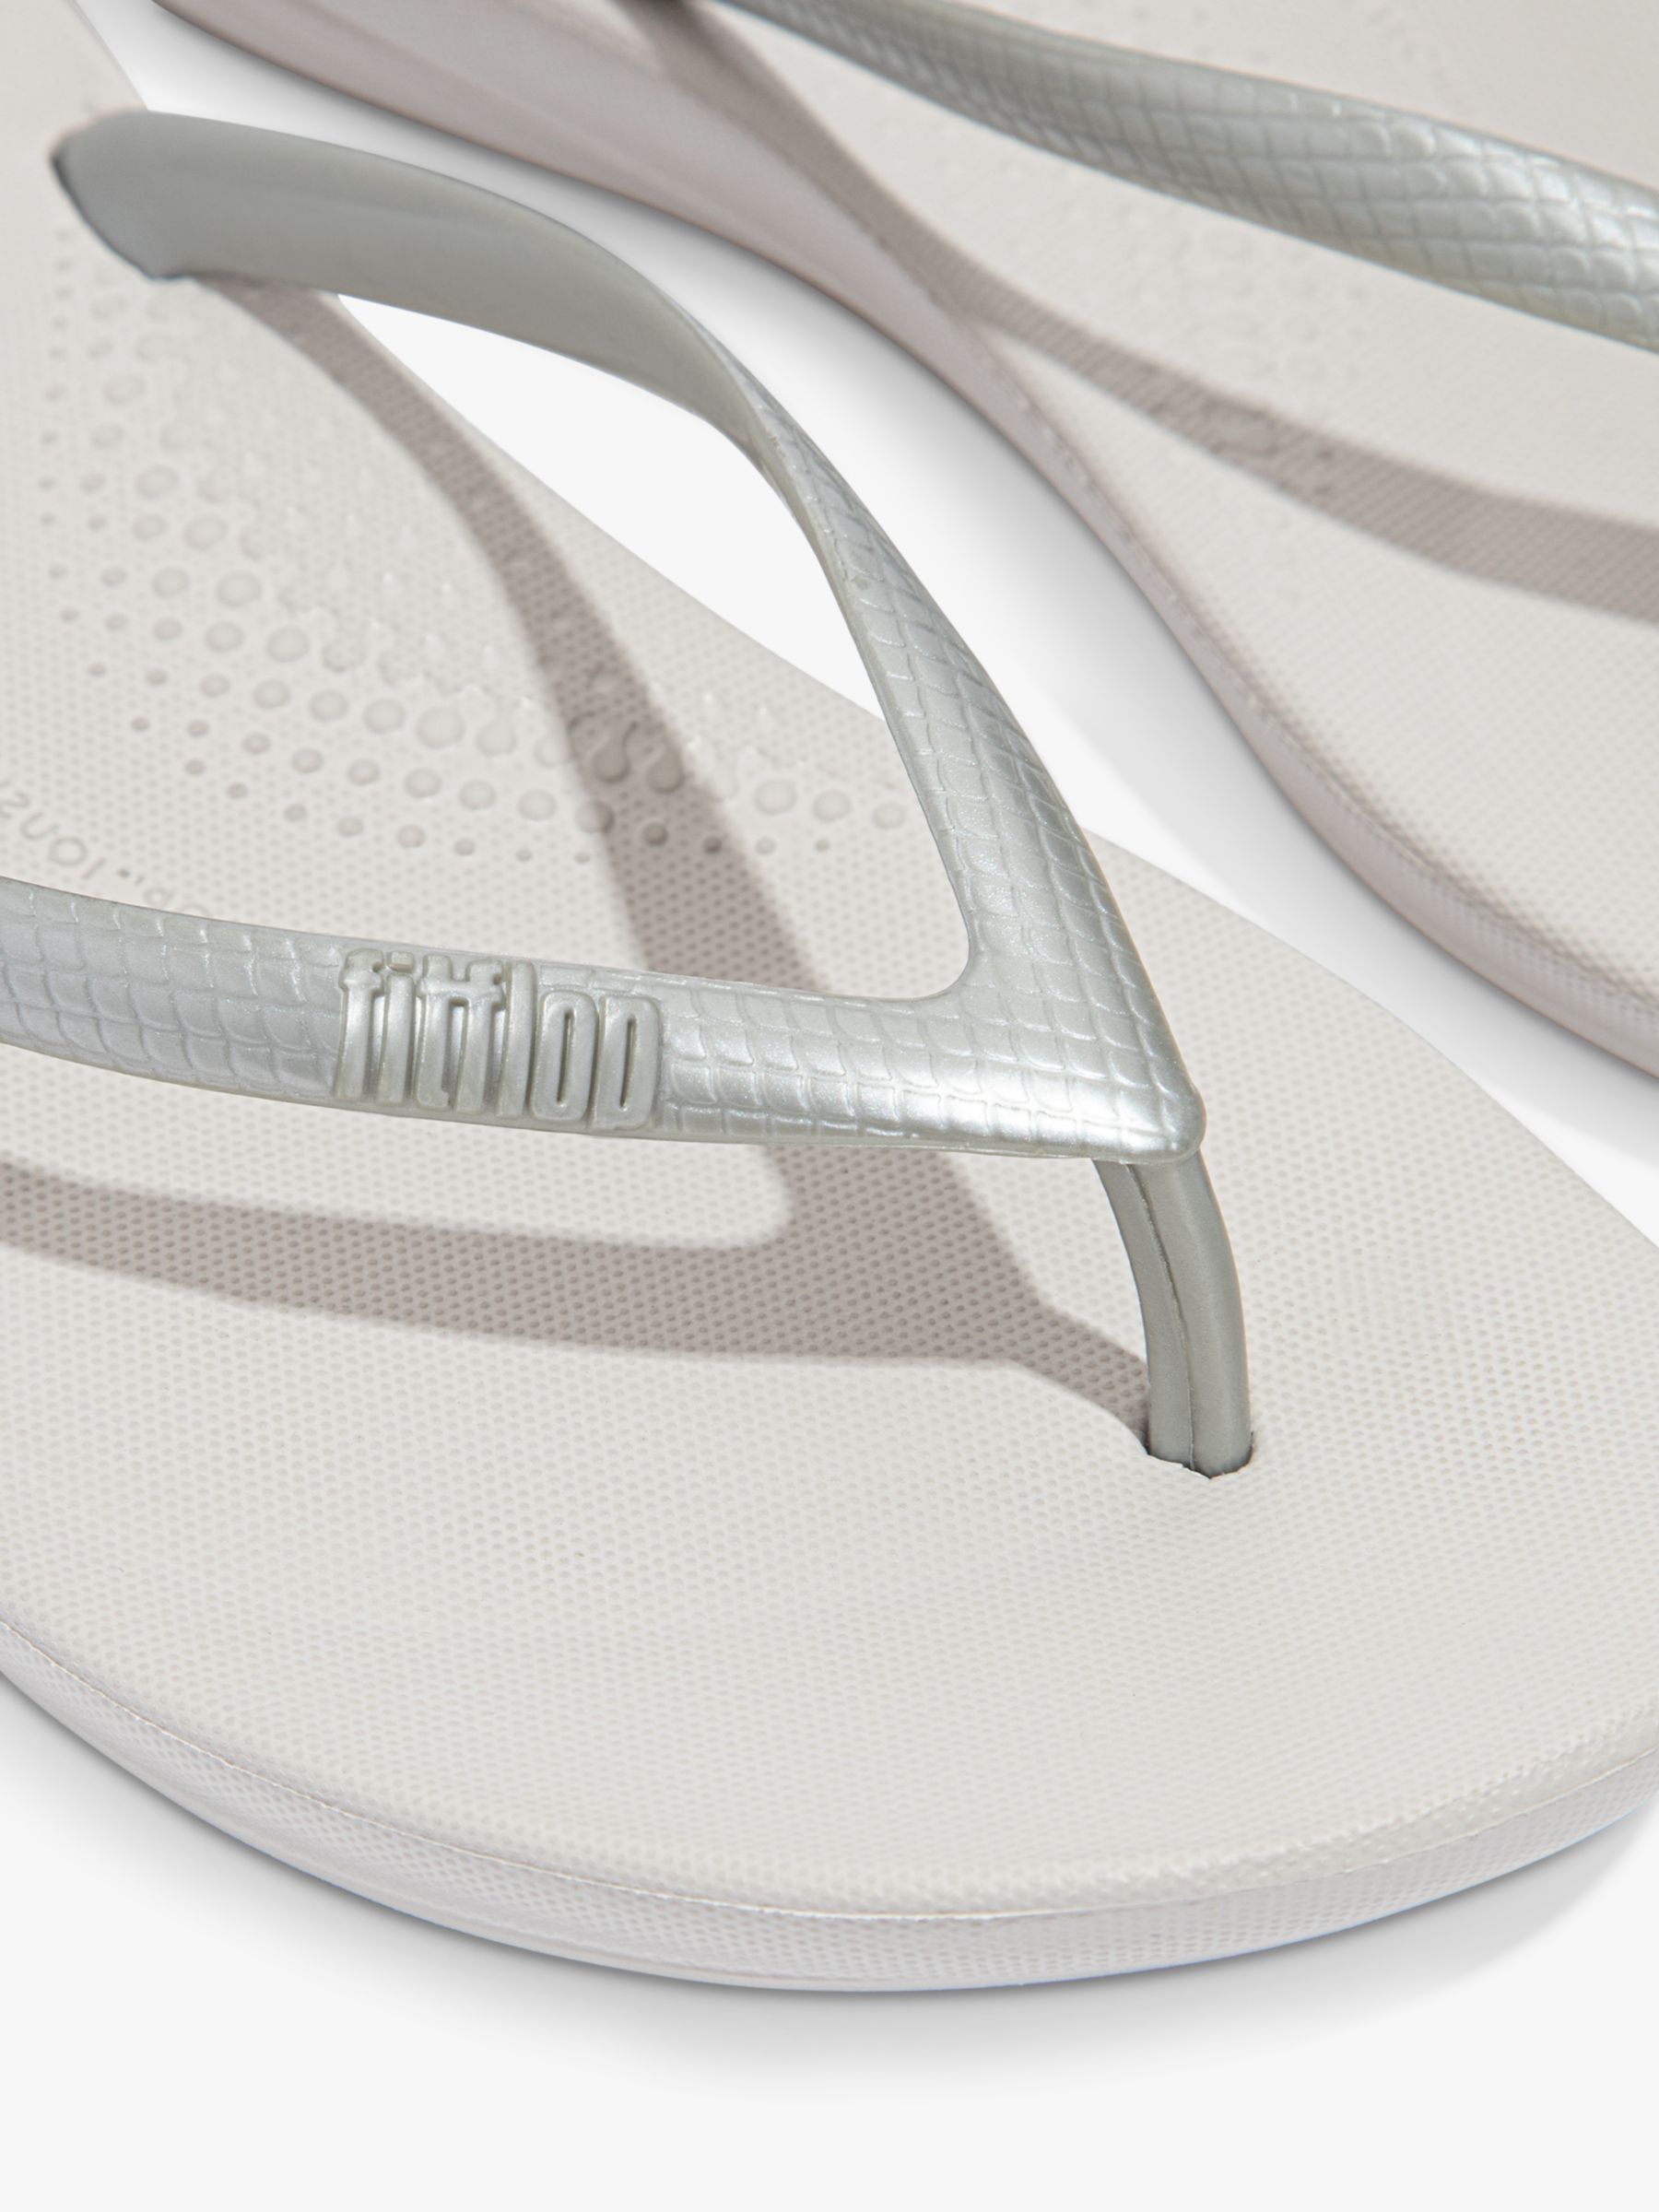 FitFlop IQushion Ergonomic Flip Flops, Silver at John Lewis & Partners